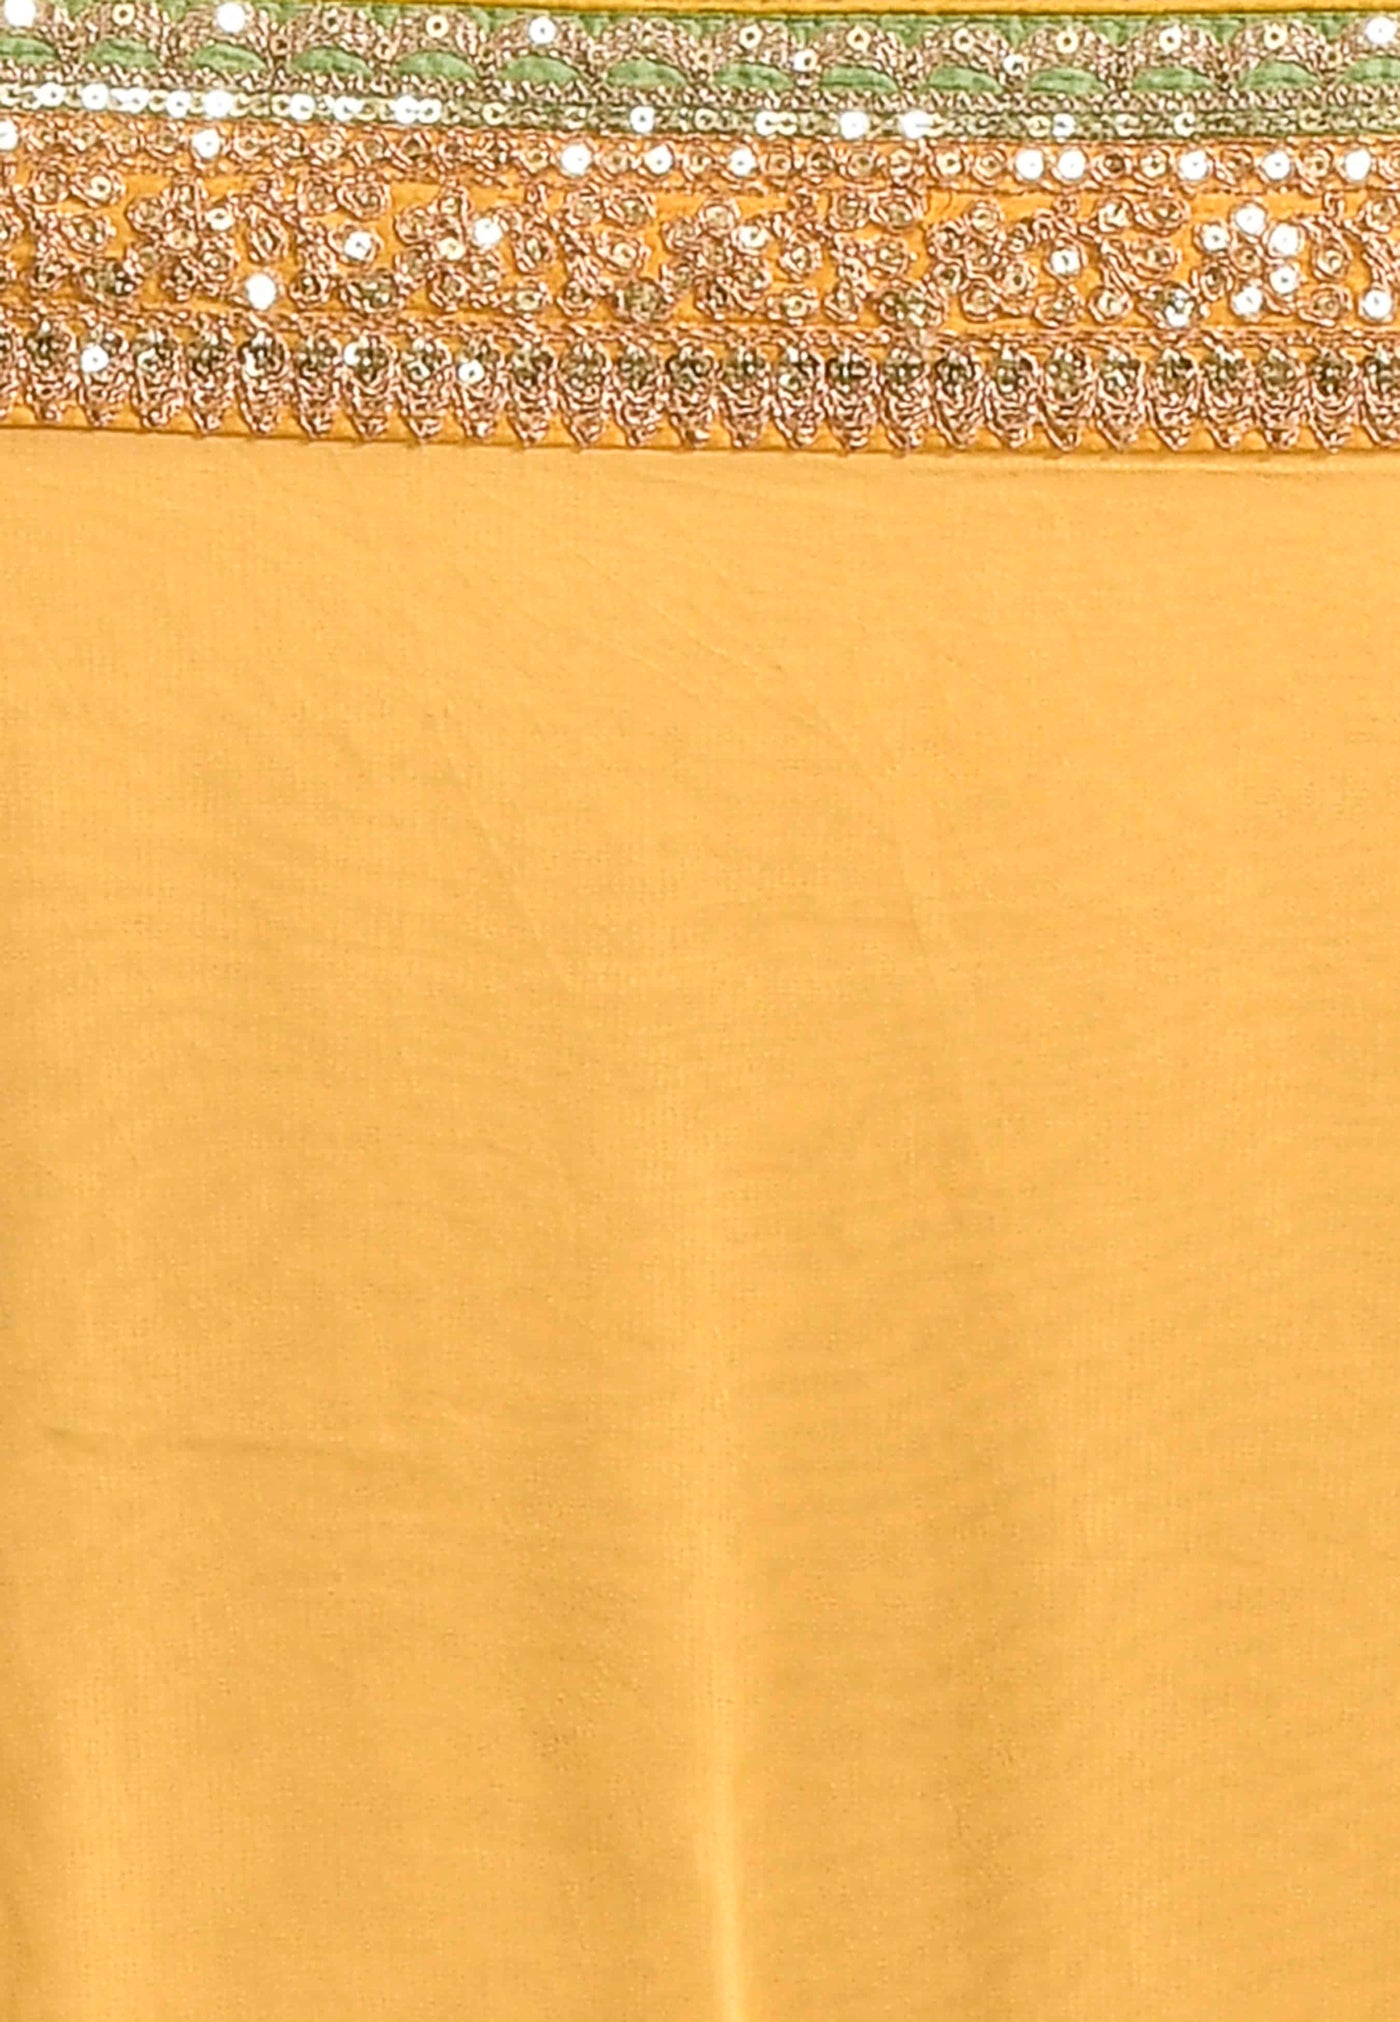 Yellow Pure Georgette Floral Saree